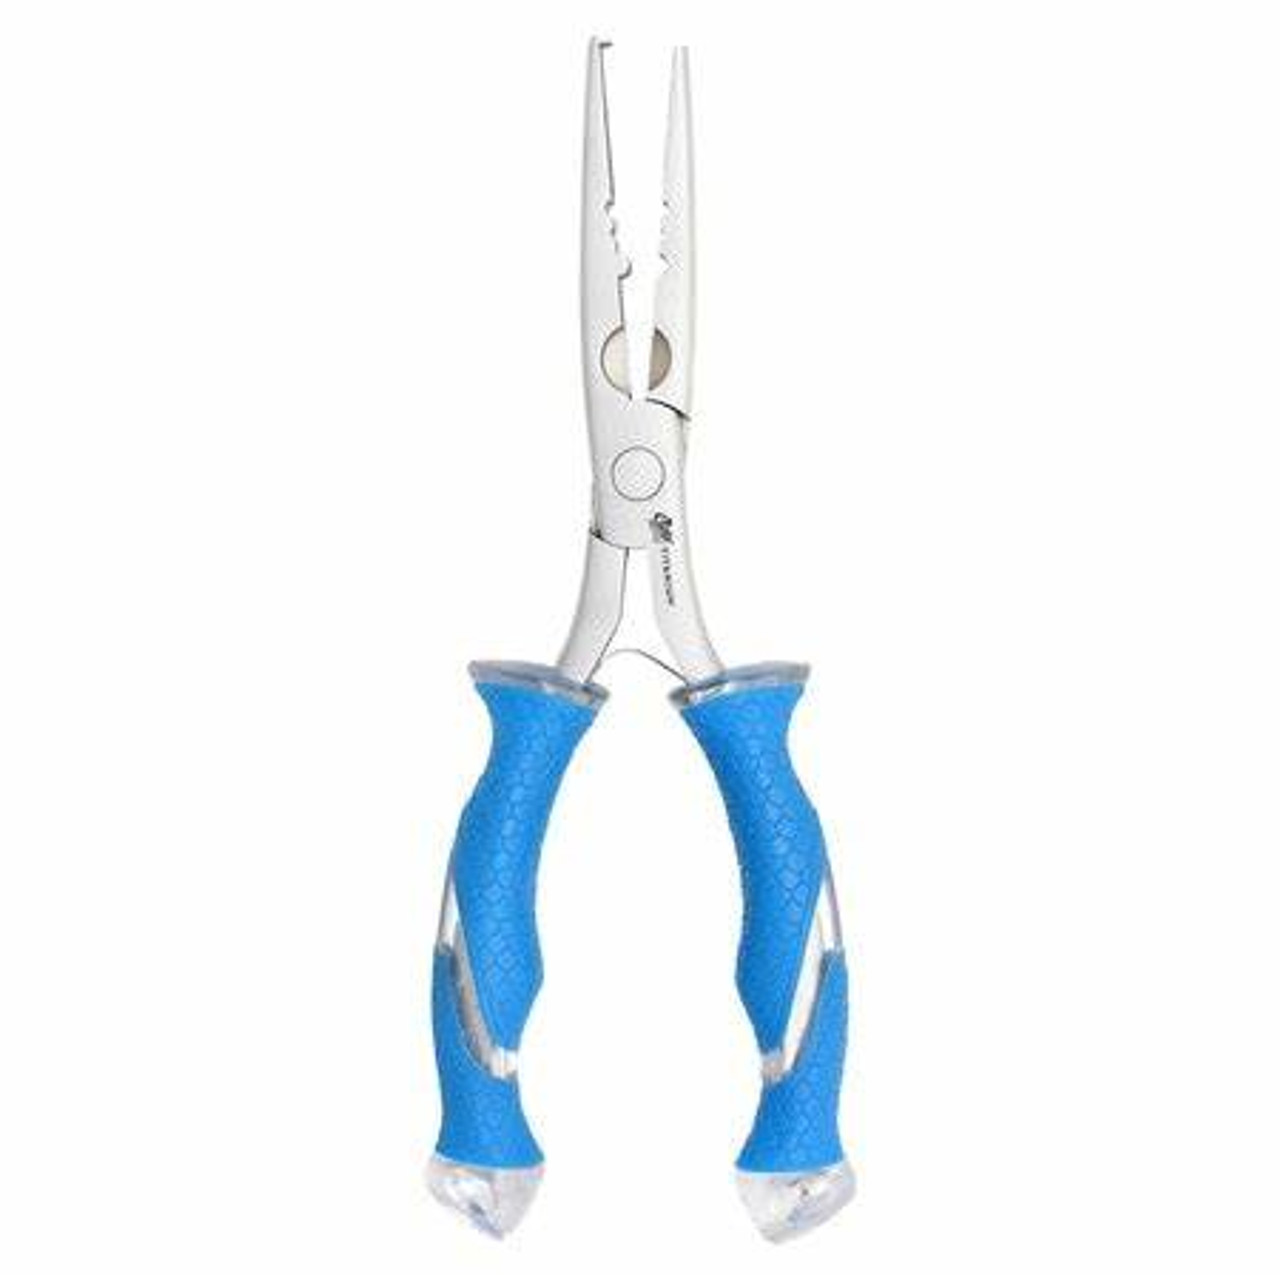 Cuda 8" Titanium Bonded Stainless Steel Freshwater Pliers with Ring Splitter